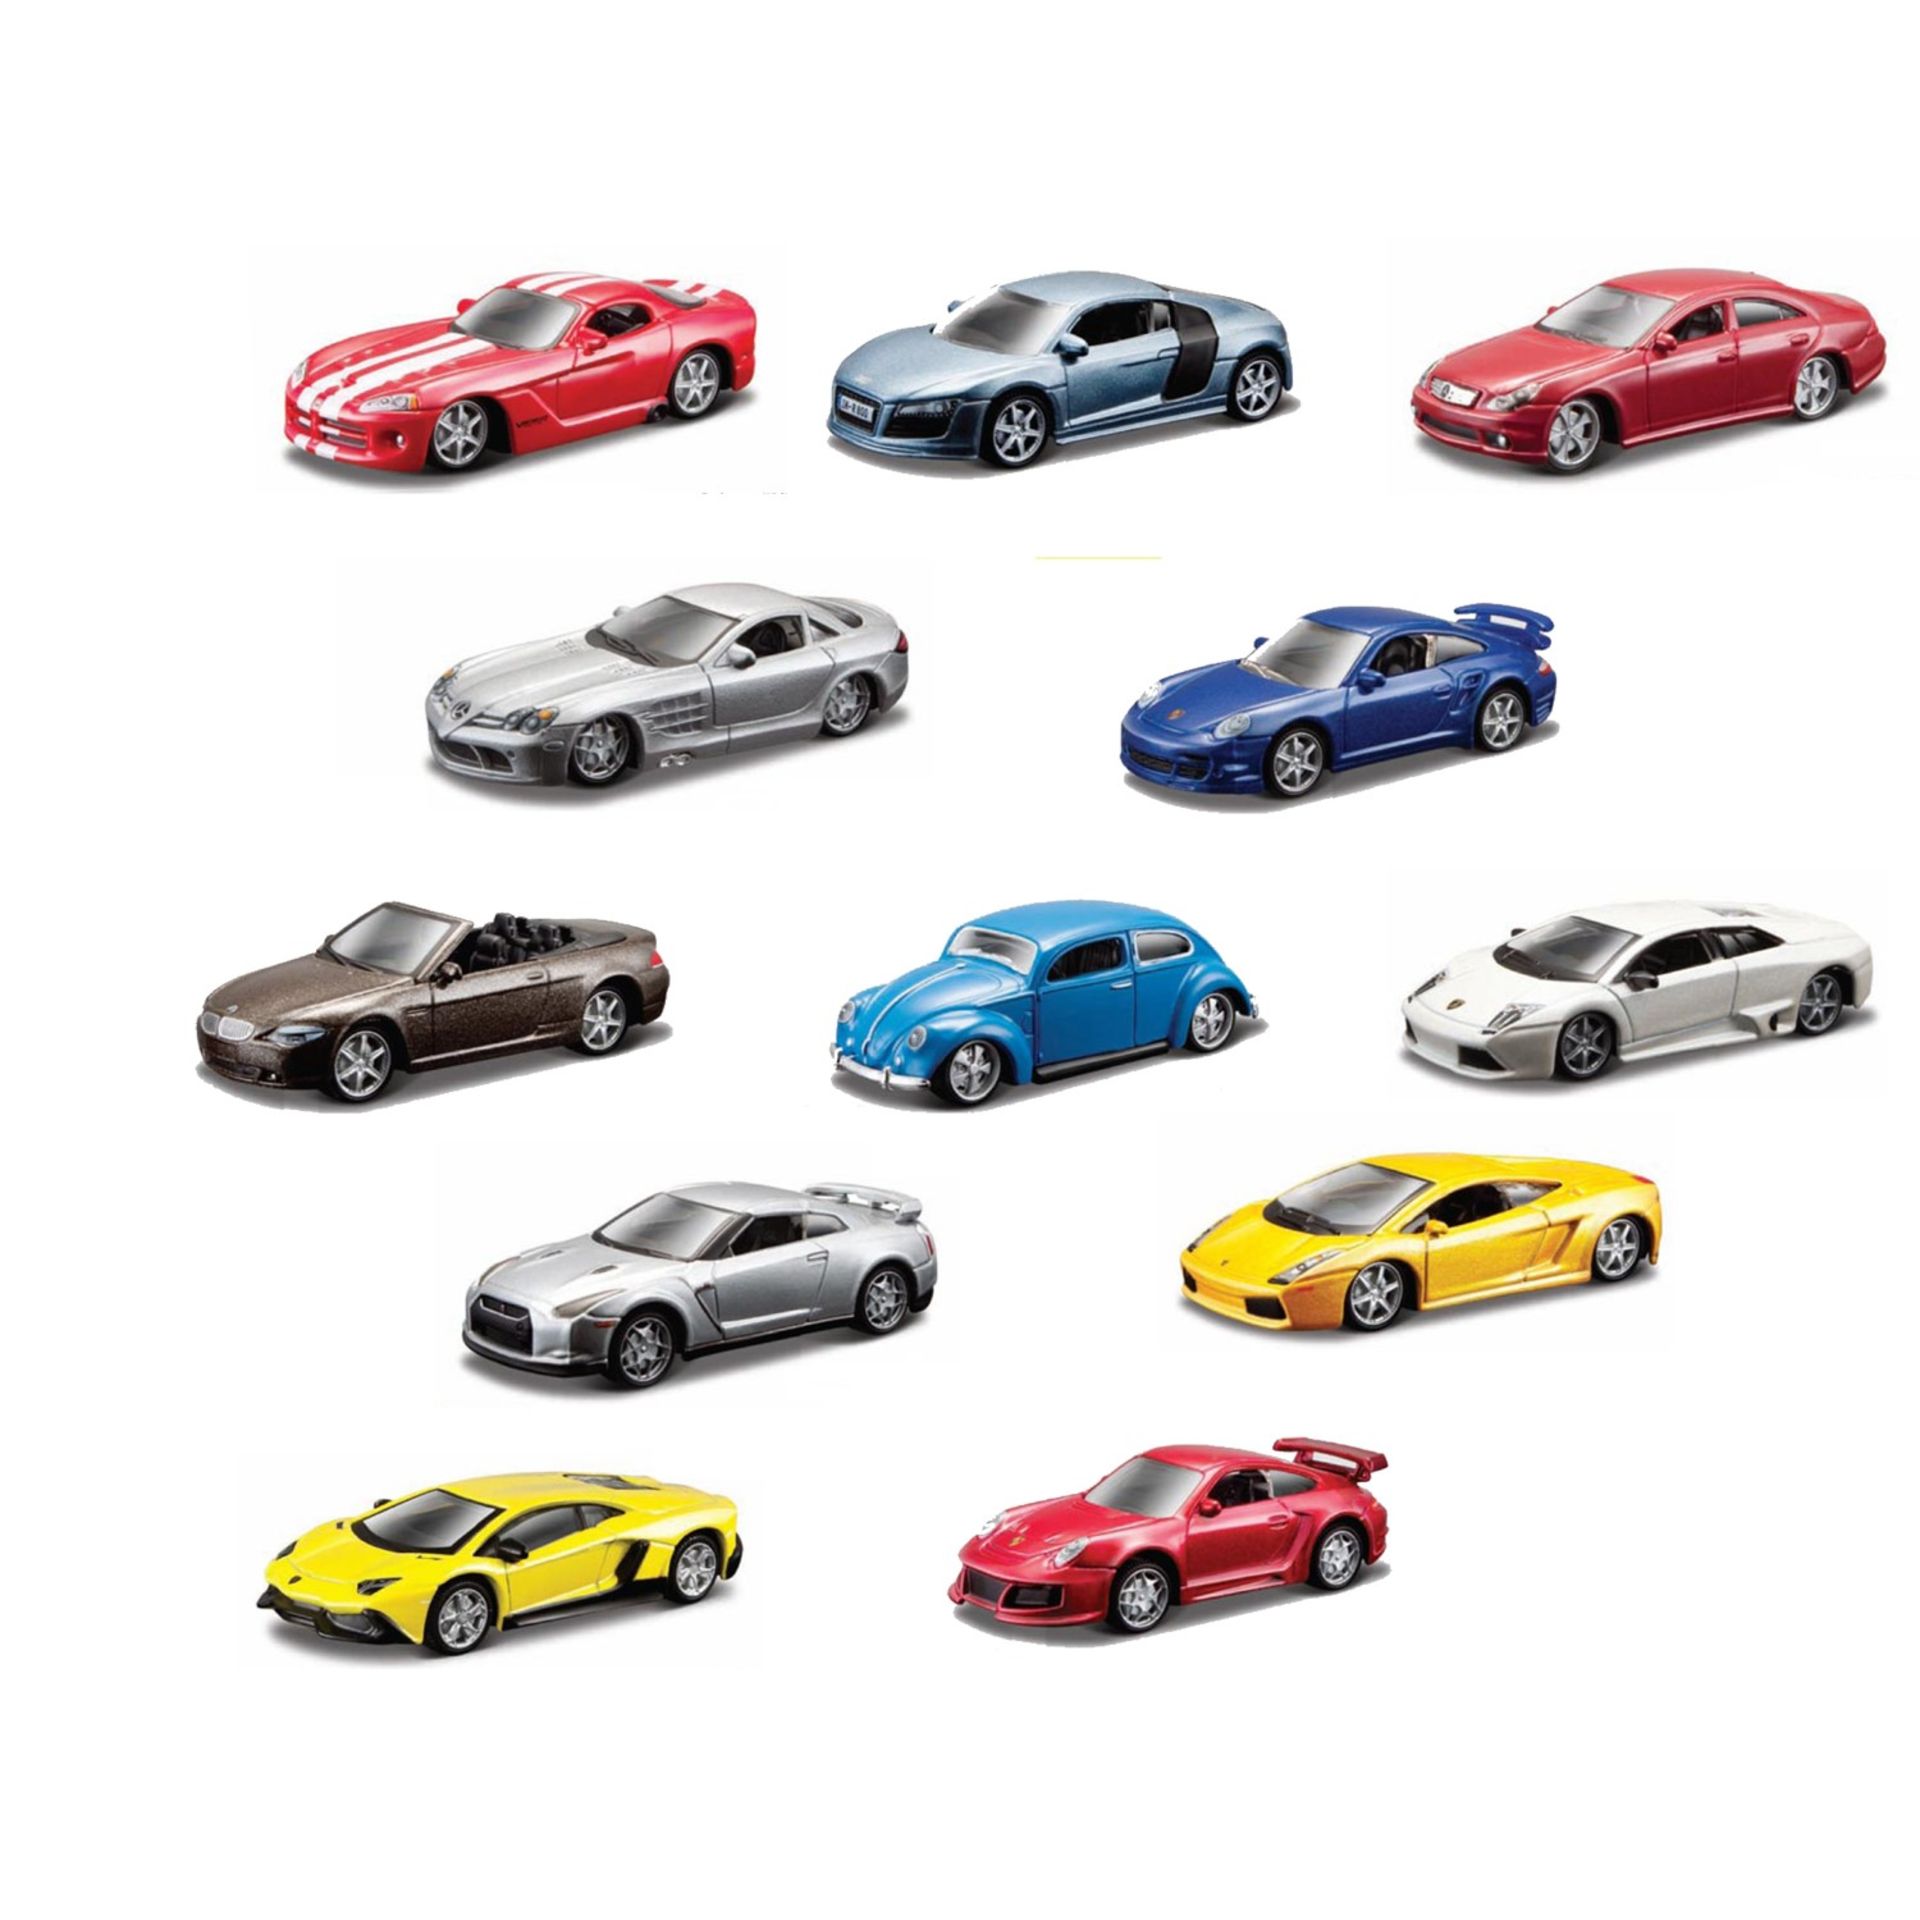 V *TRADE QTY* Brand New Lot of Twelve Burago Toy Cars 1/64 Scale (Cars May Vary From Image - For